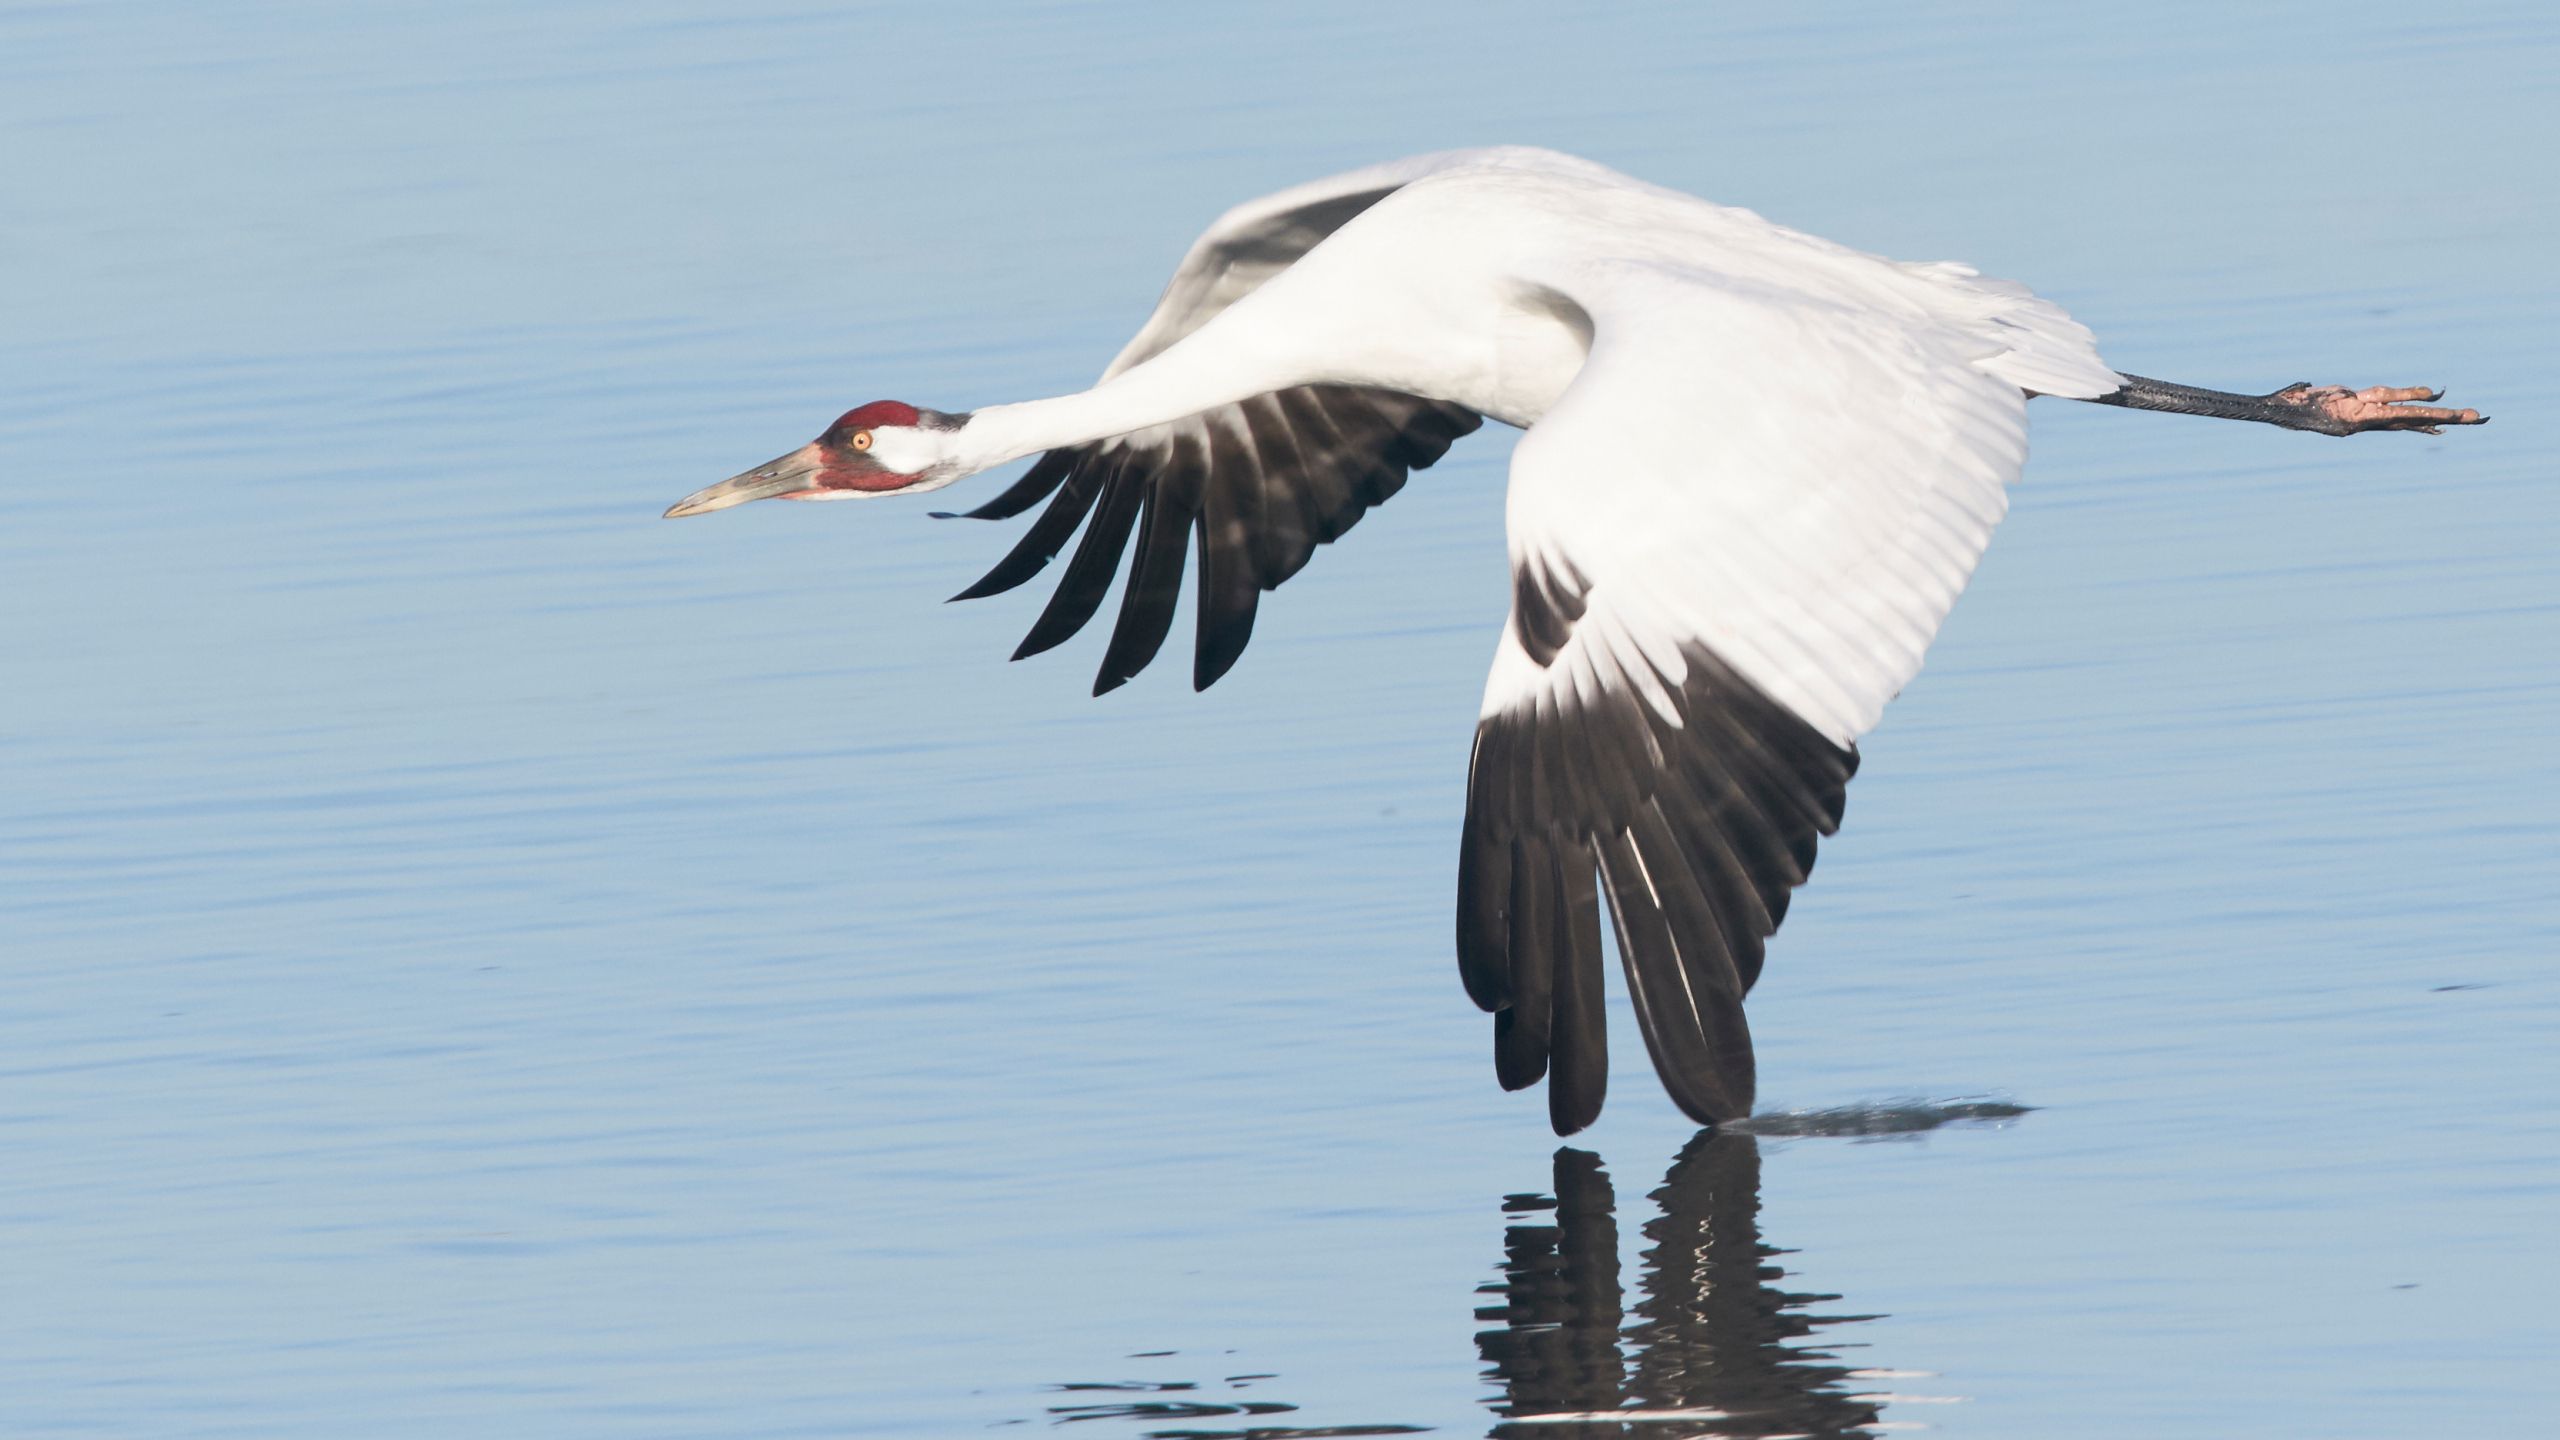 $000 in rewards for leads to whooping crane killers in Louisiana